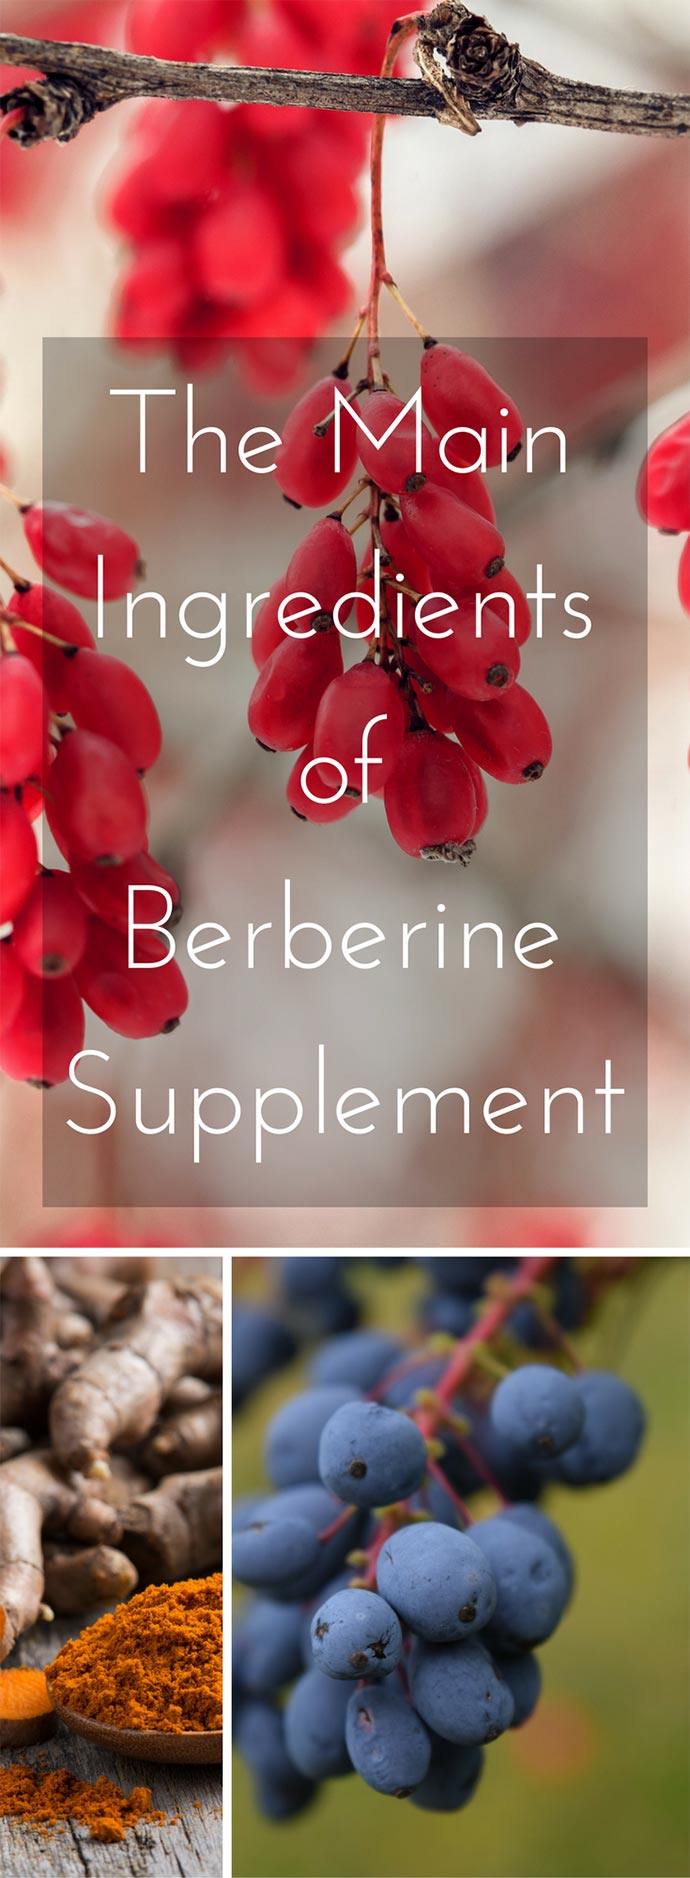 main components of berberine supplement: barberry, Oregon grape, and turmeric tree